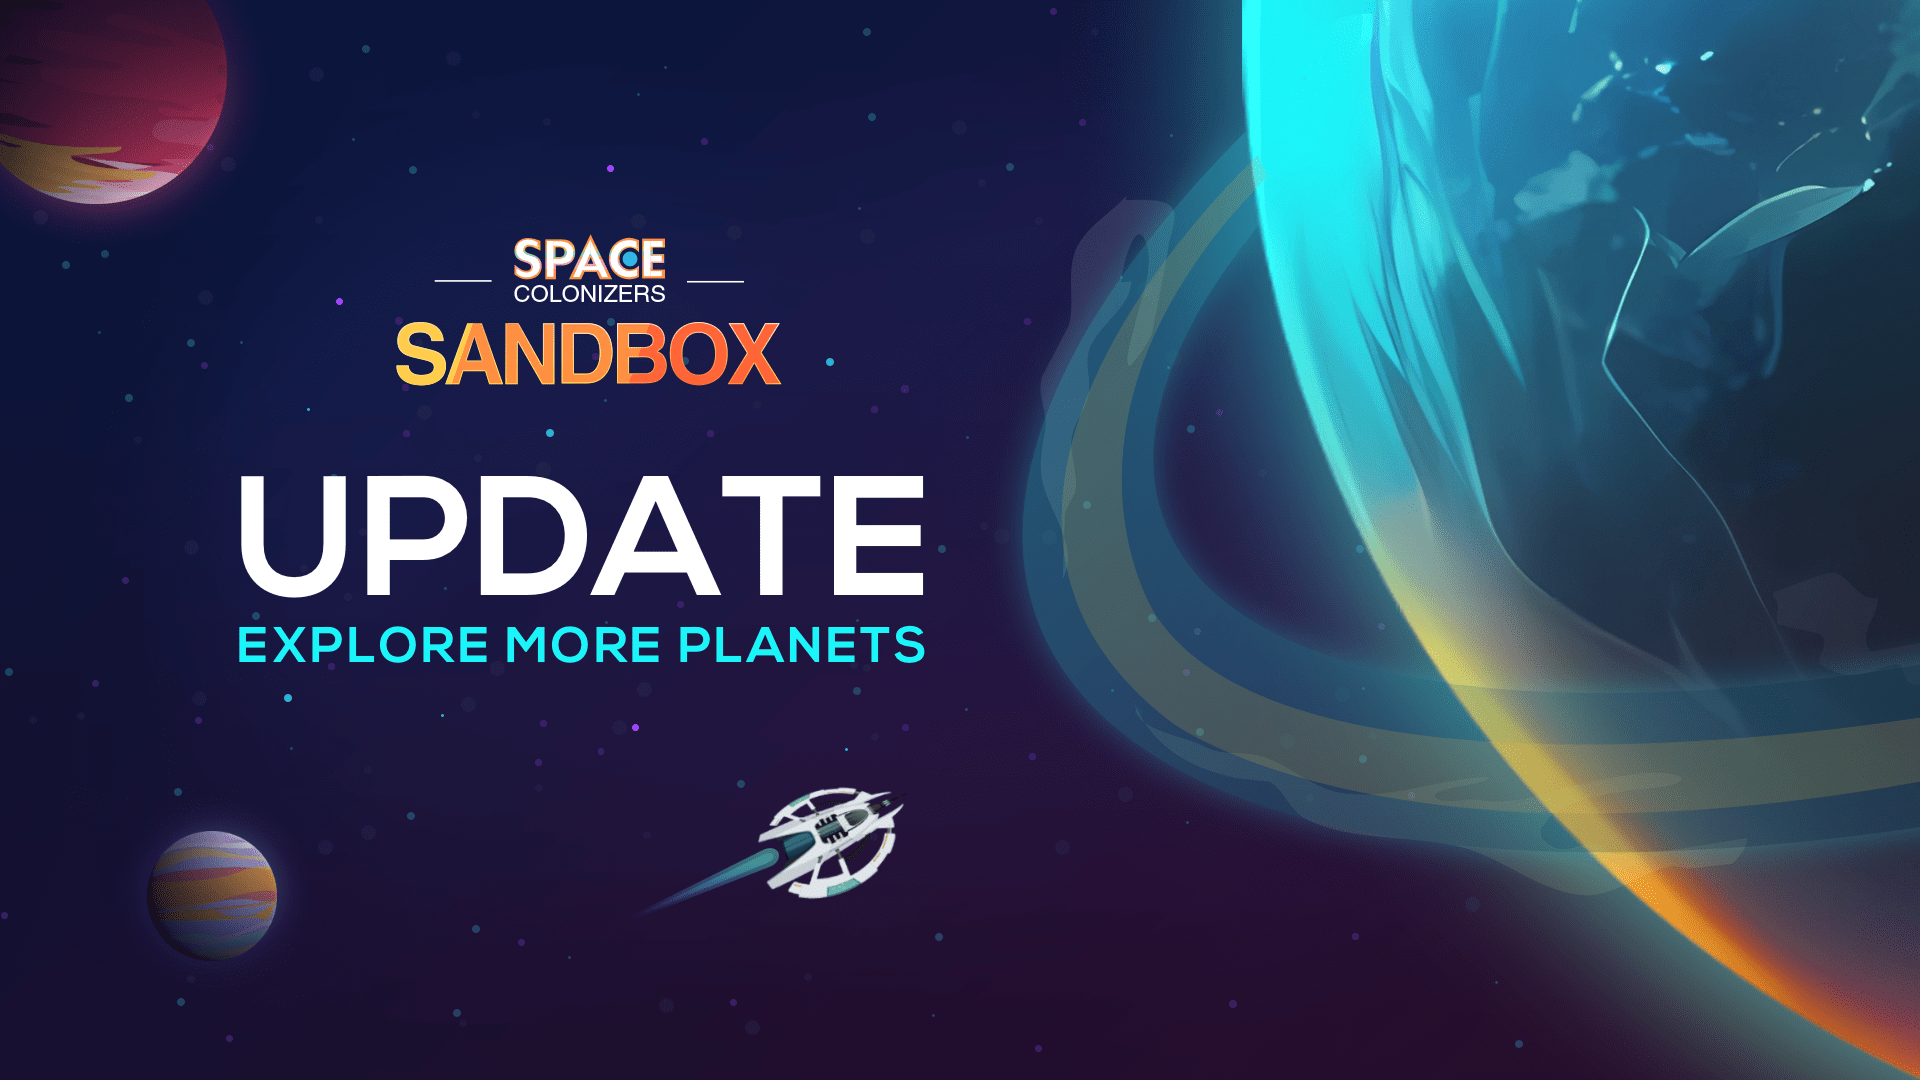 We have released the updated version about Space Colonizers – the Sandbox!